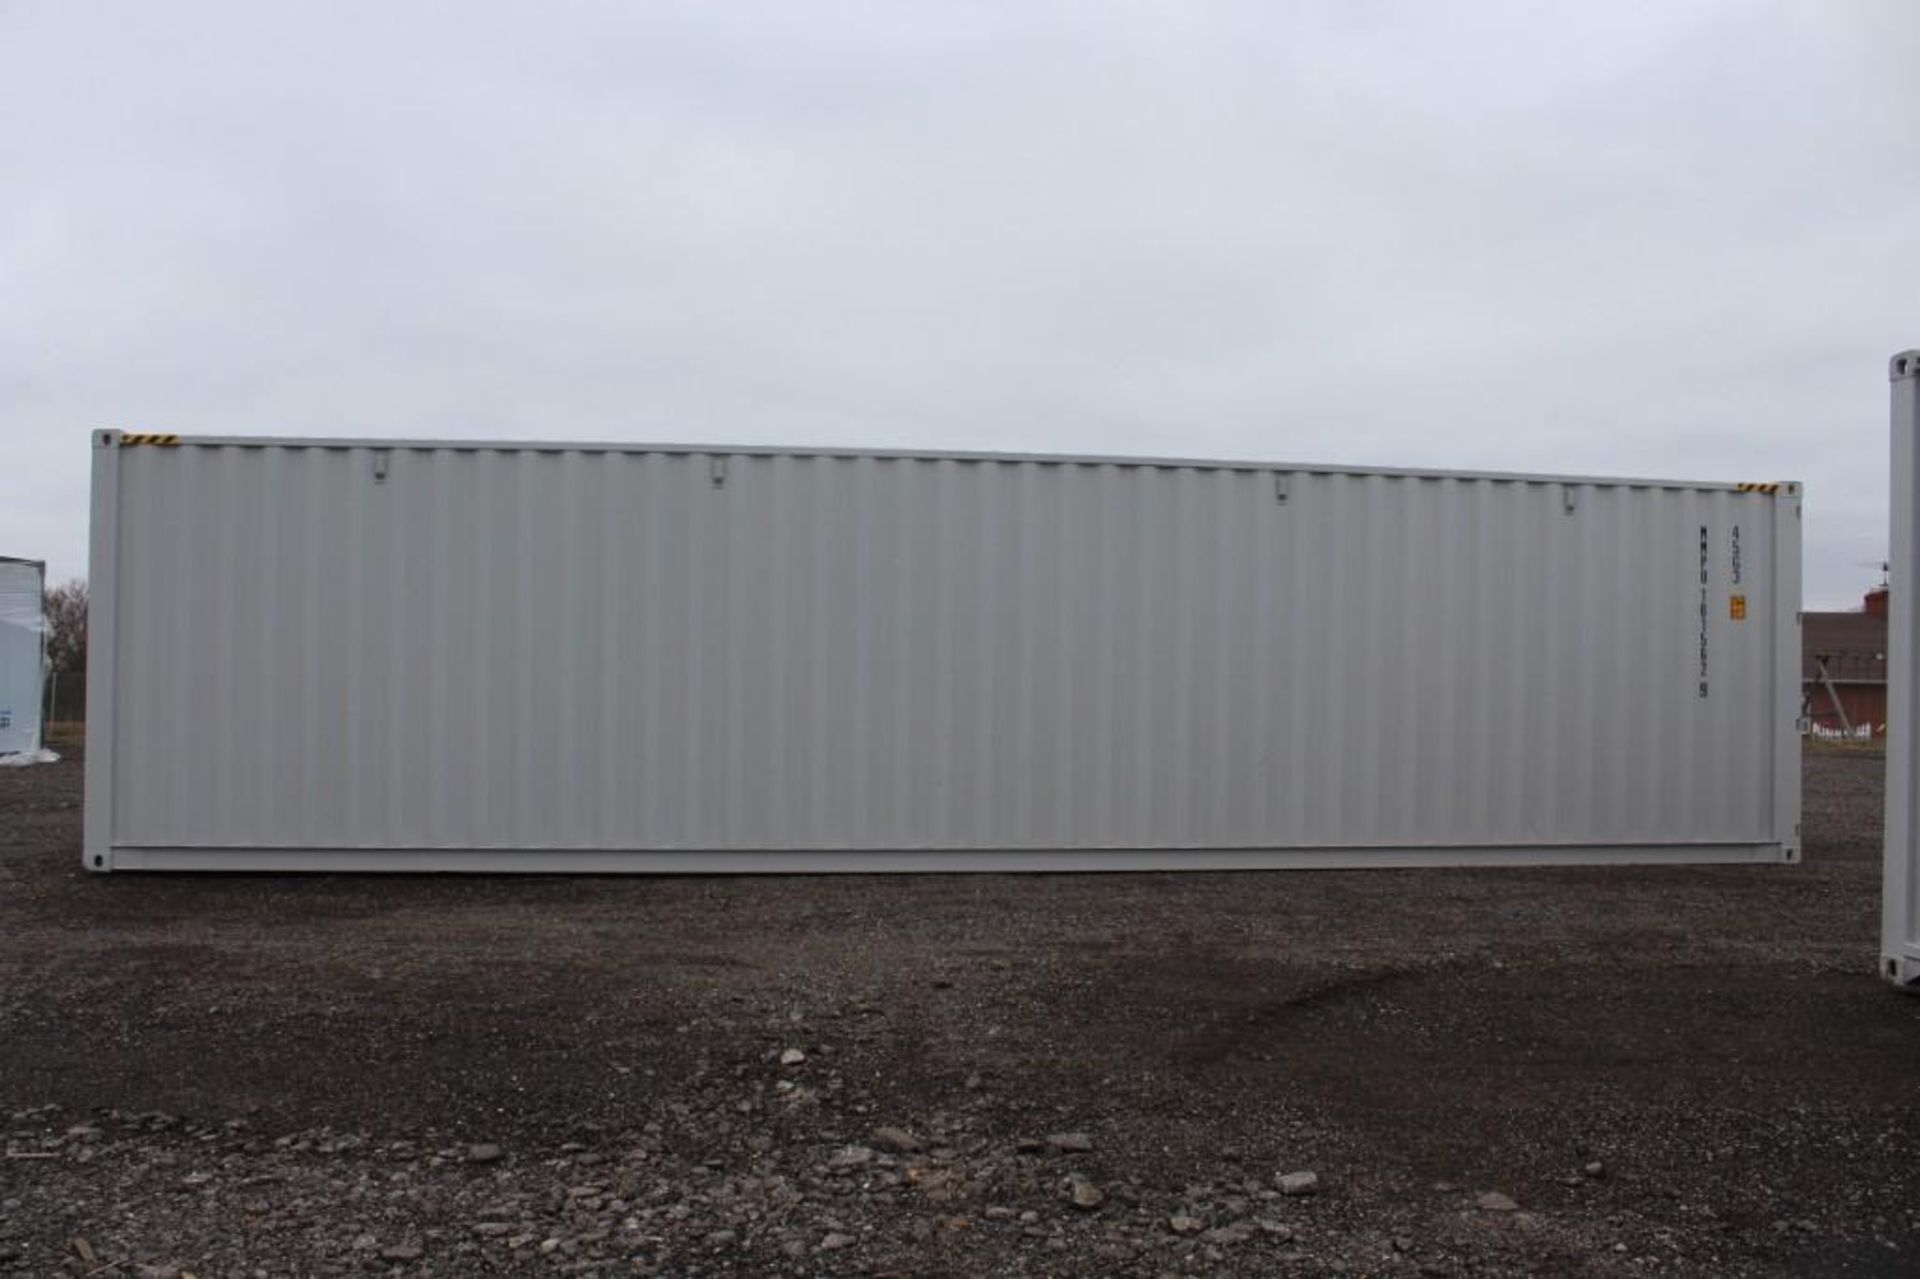 New One Trip 40' High Cube Multi Door Container - Image 4 of 7